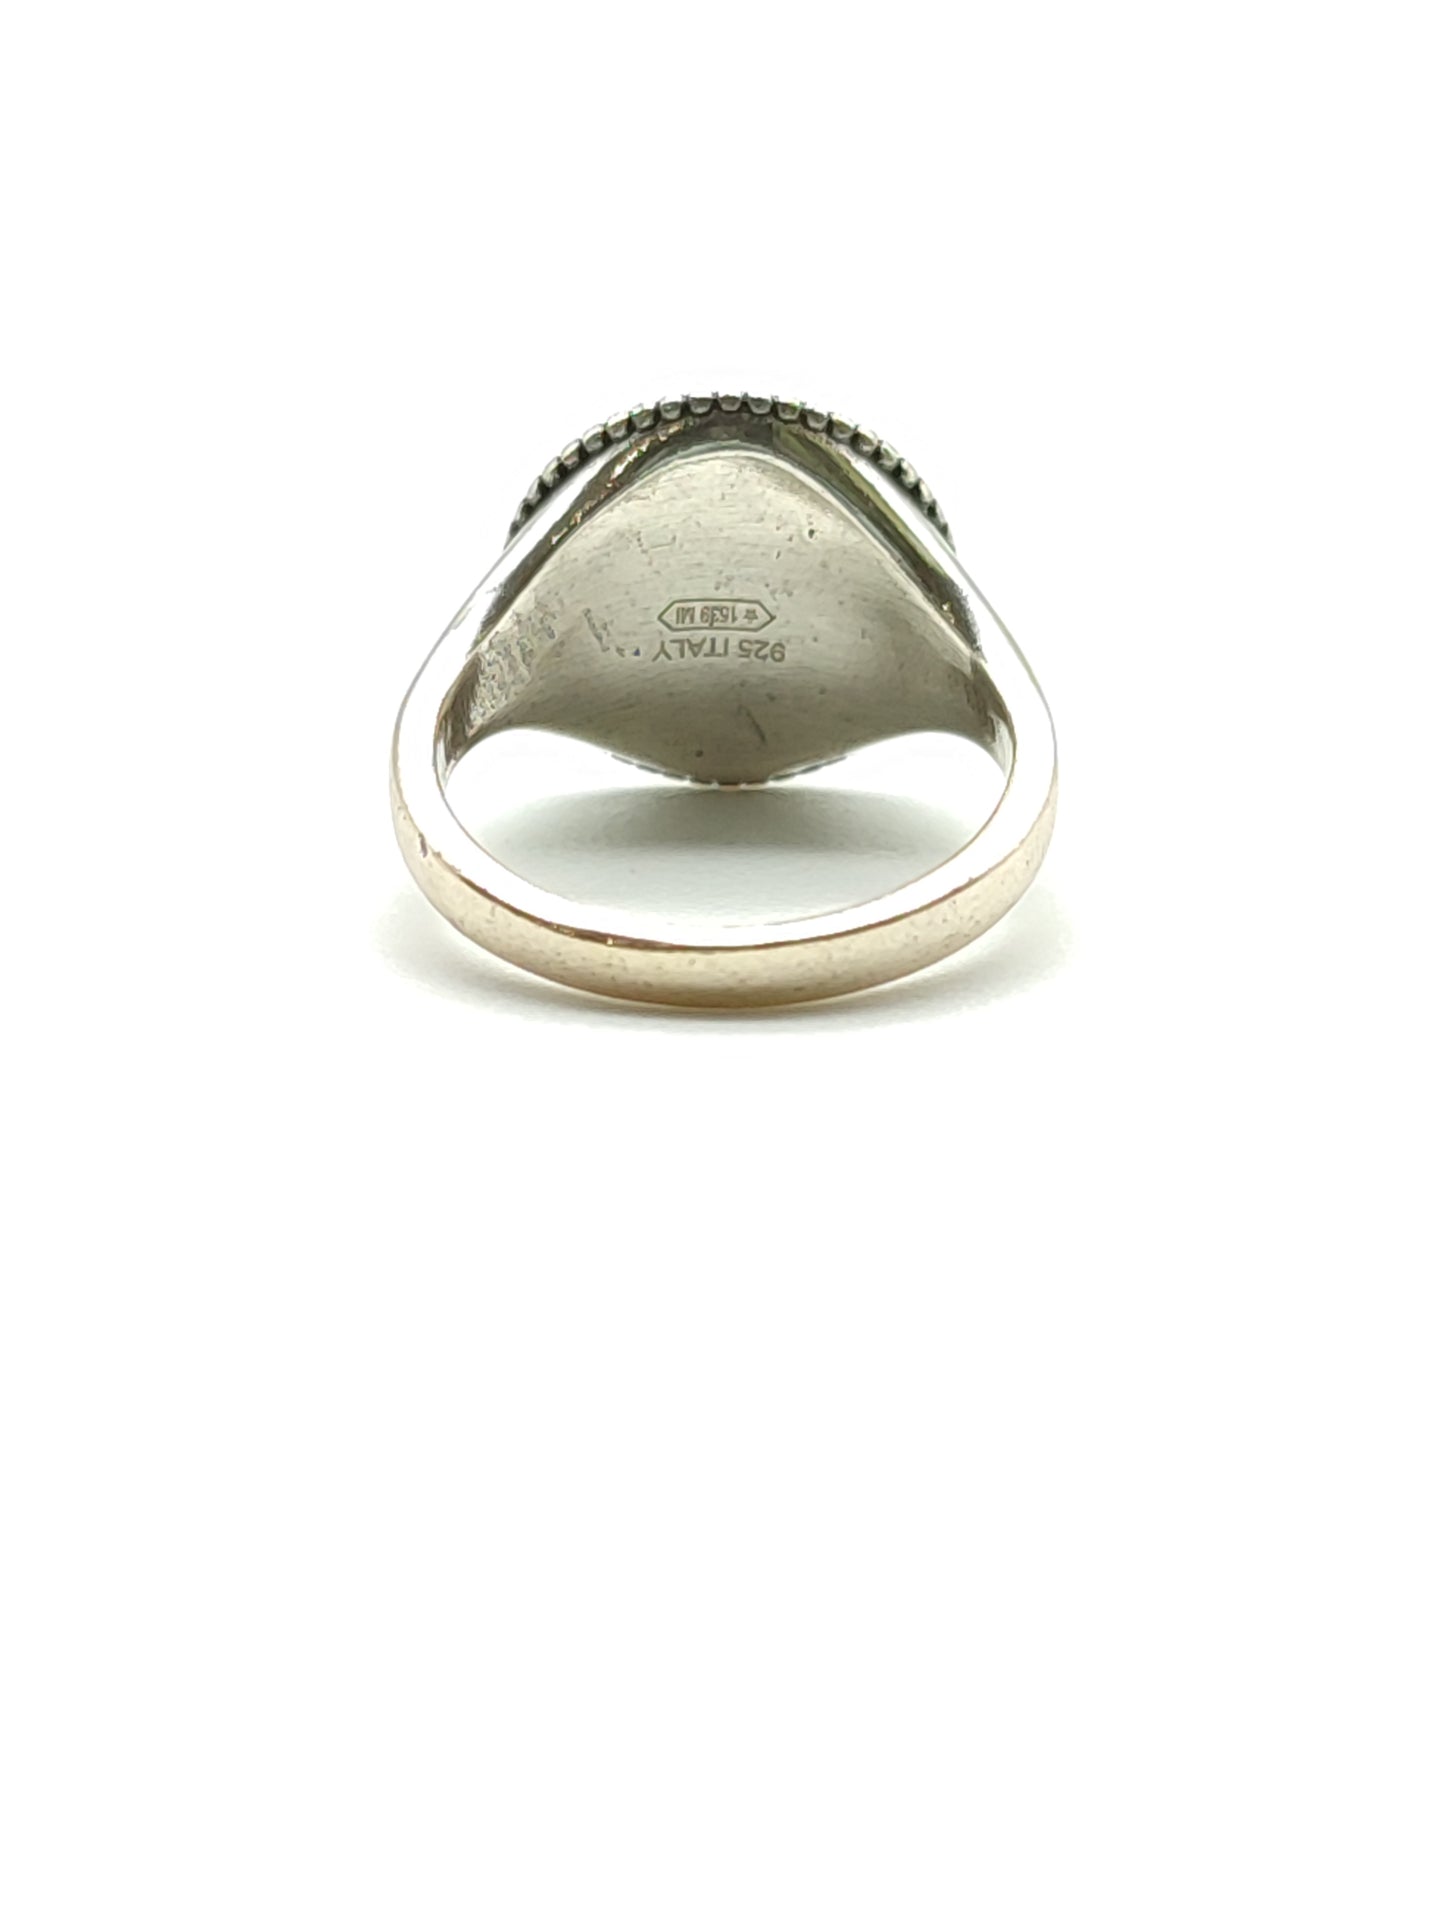 Round silver ring with low relief Snake